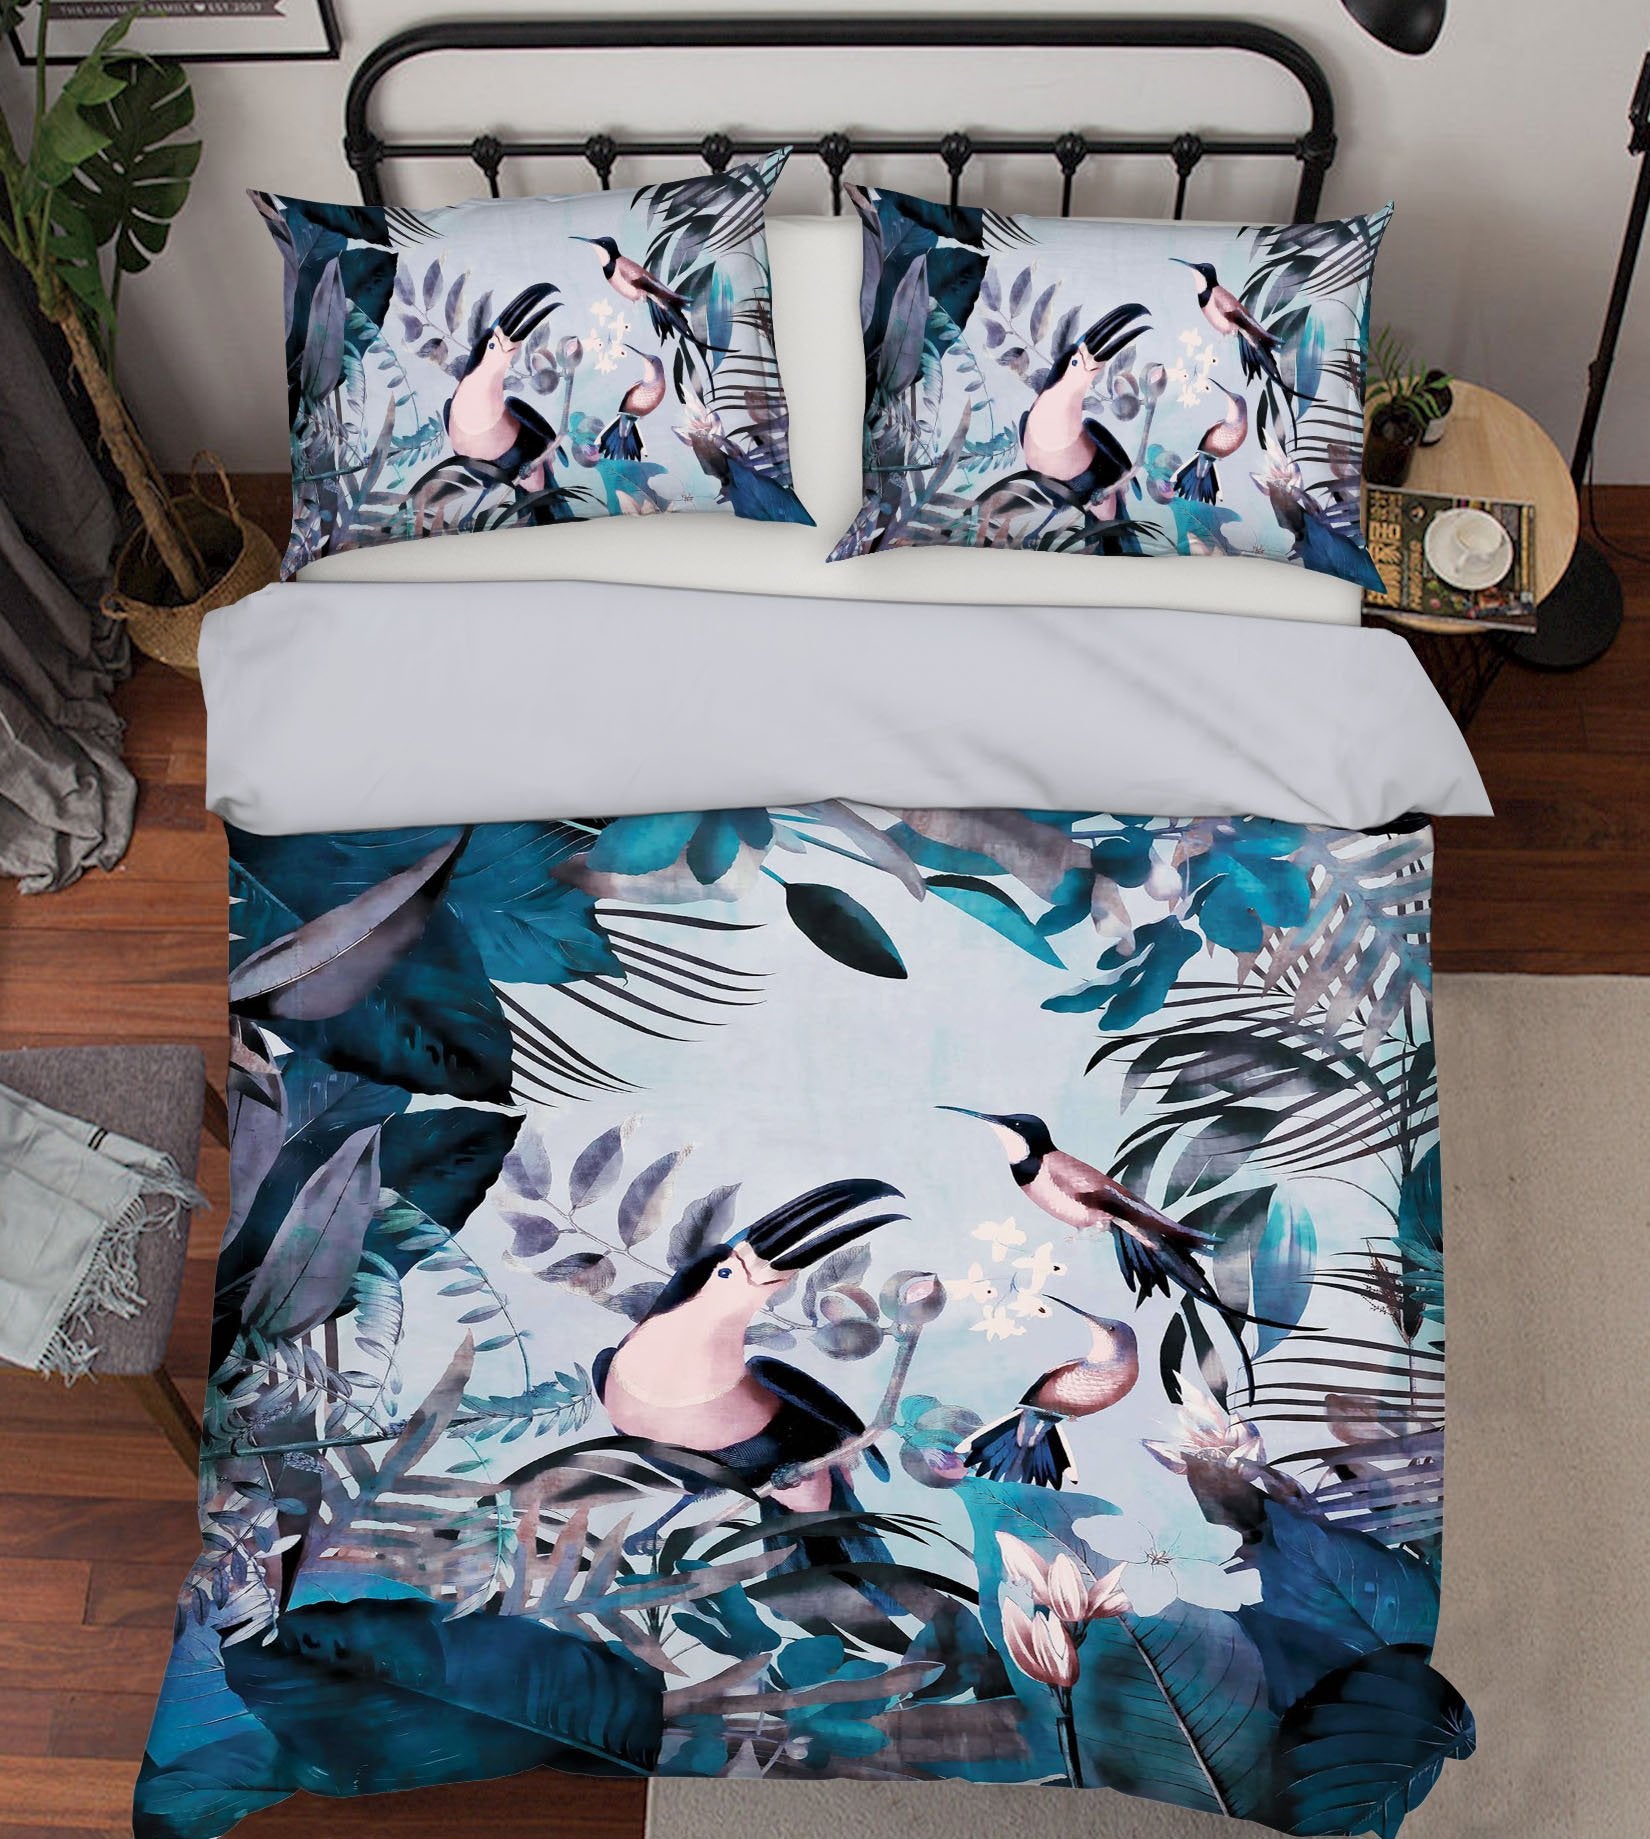 3D Bird Forest 2107 Andrea haase Bedding Bed Pillowcases Quilt Quiet Covers AJ Creativity Home 